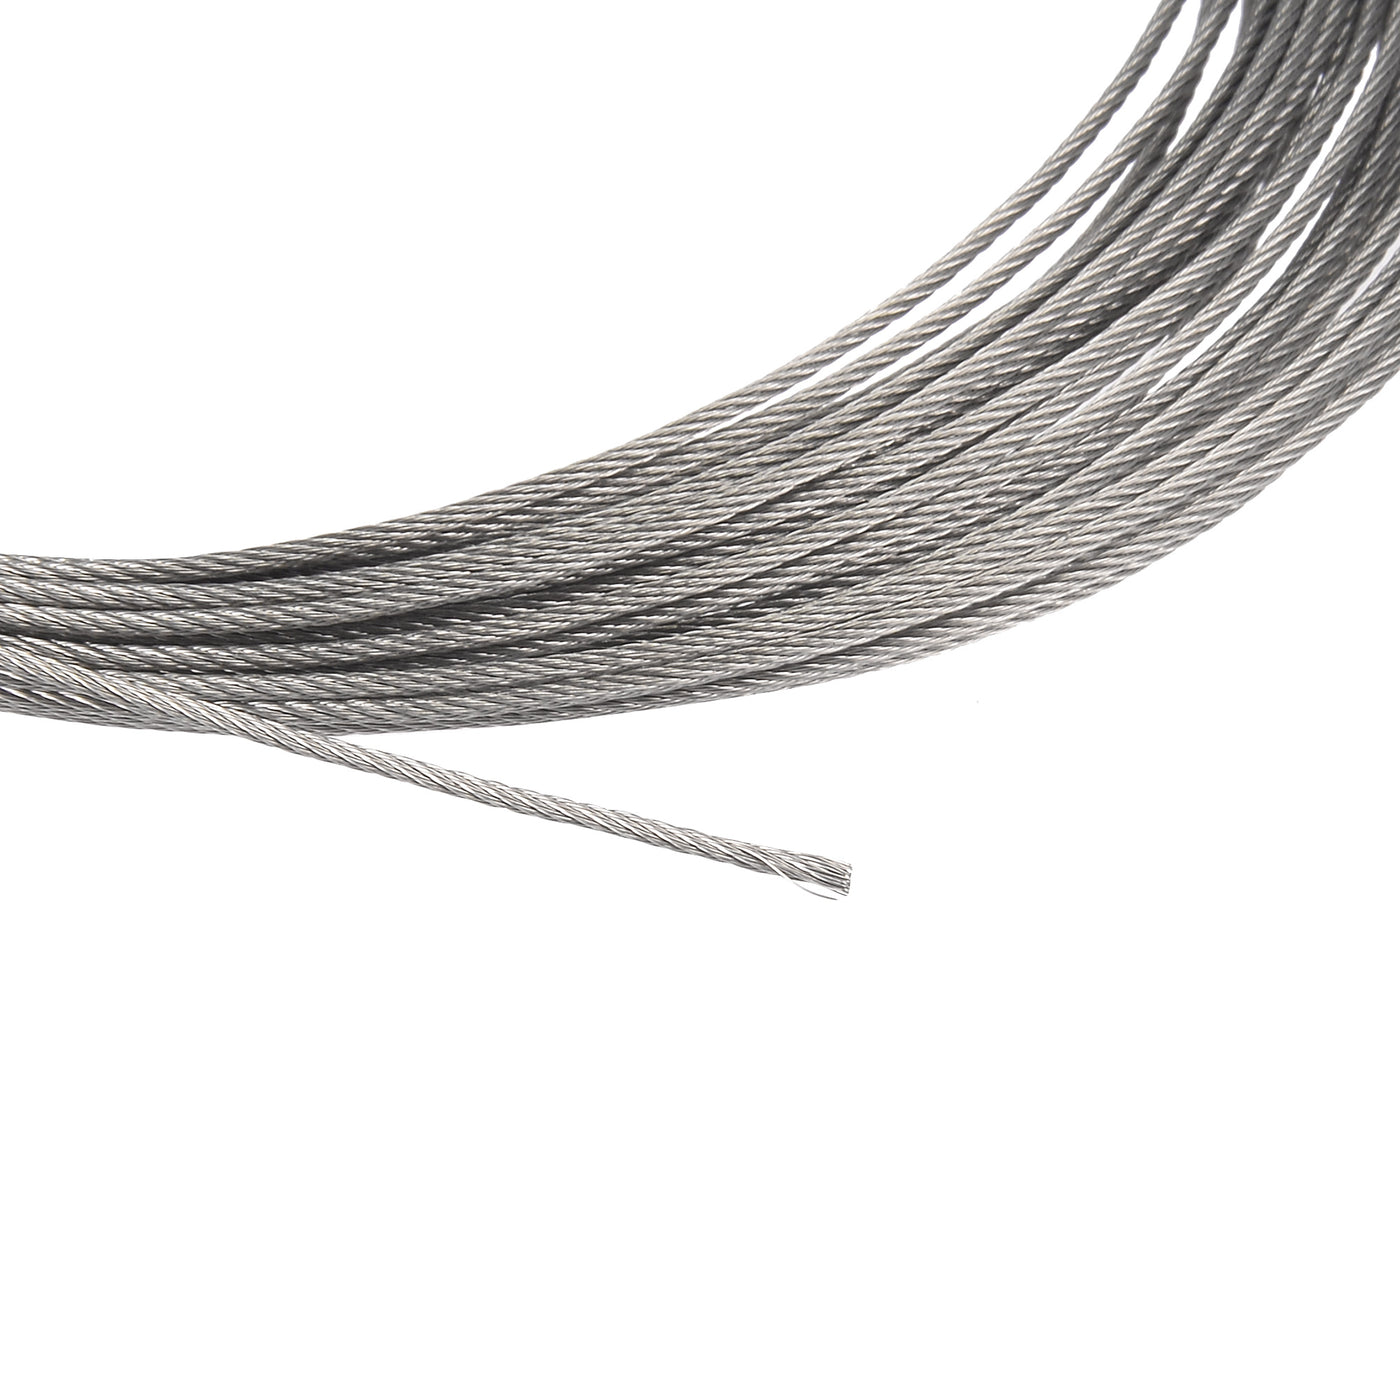 Hoisting 7x7 1mm Dia Stainless Steel Flexible Wire Rope 32.8ft Length